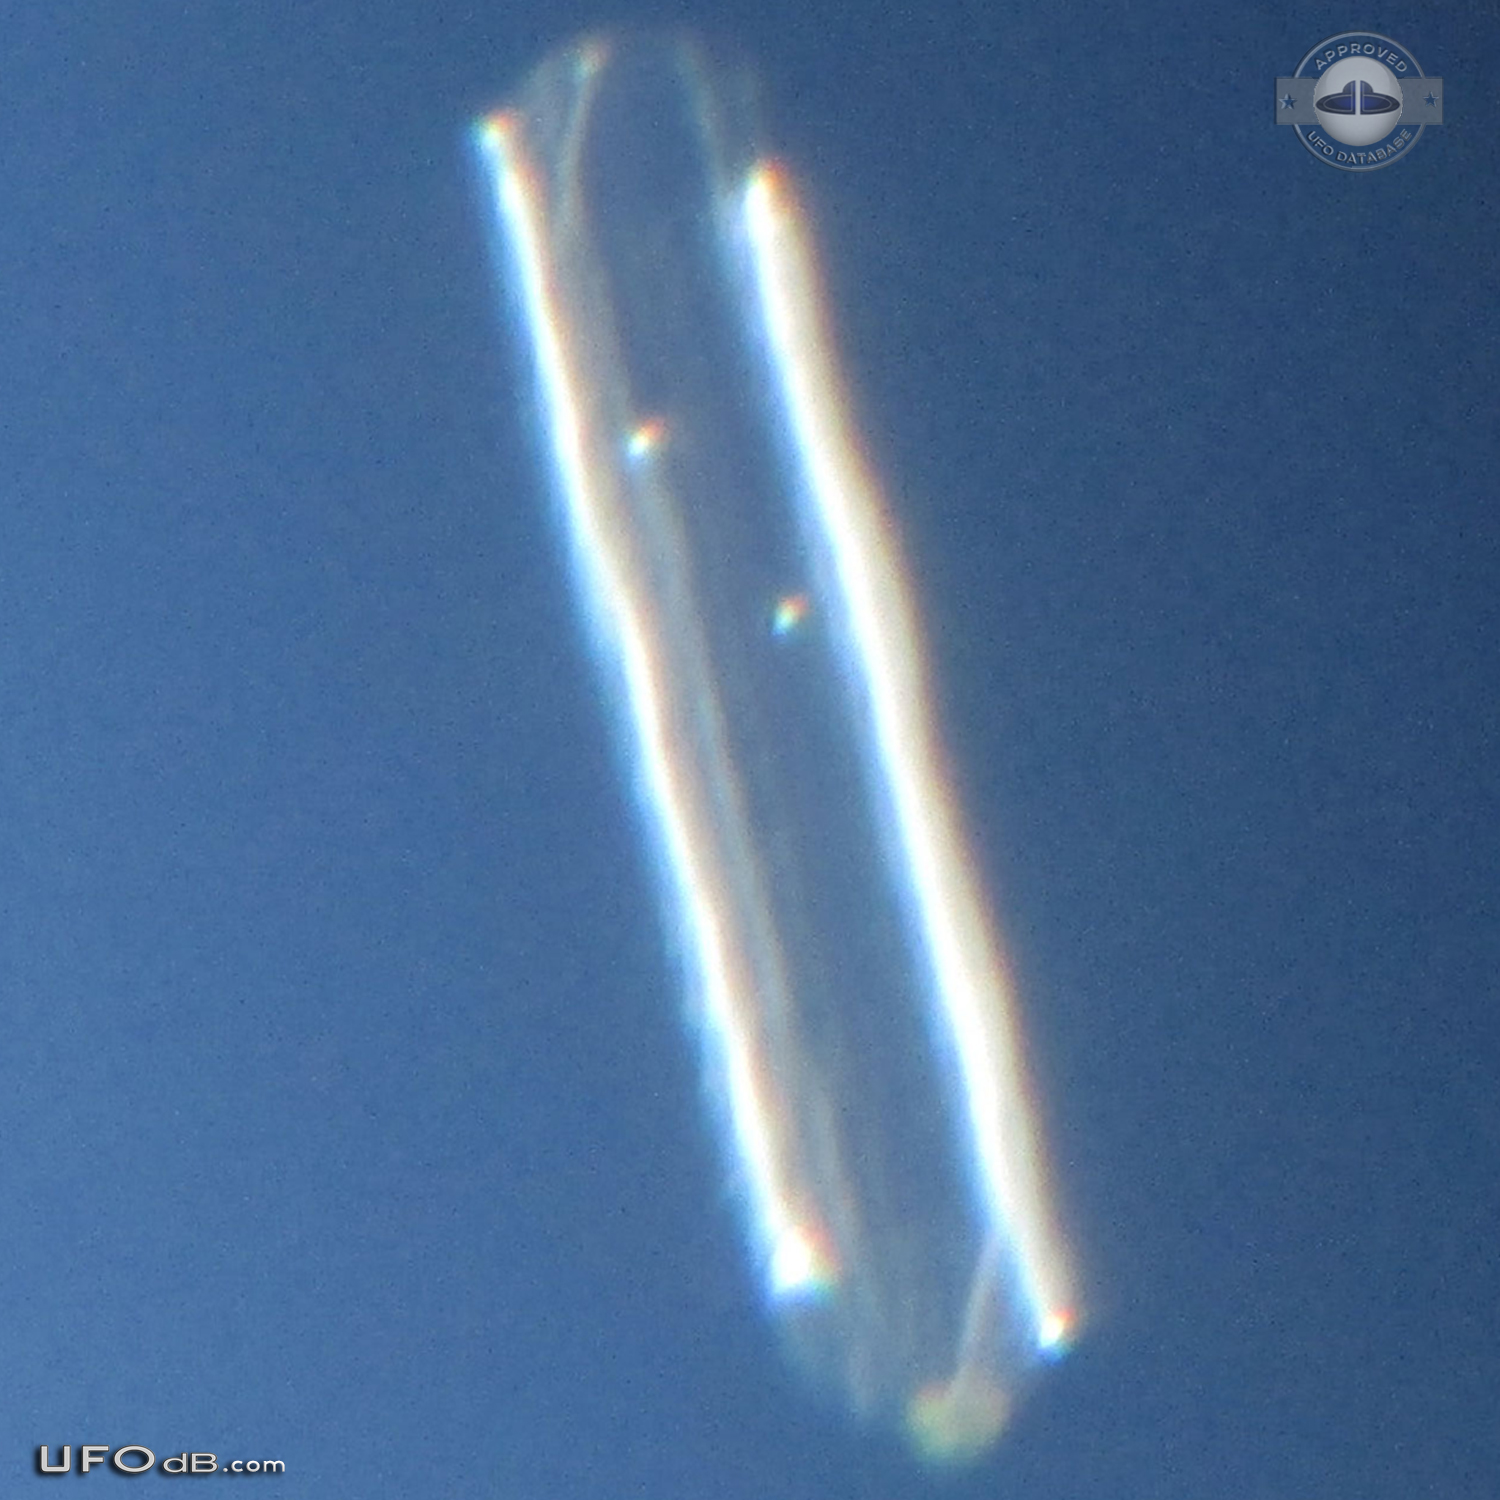 Long cylindrical UFO in bright day light over Virgies, Kentucky 2012 UFO Picture #503-5